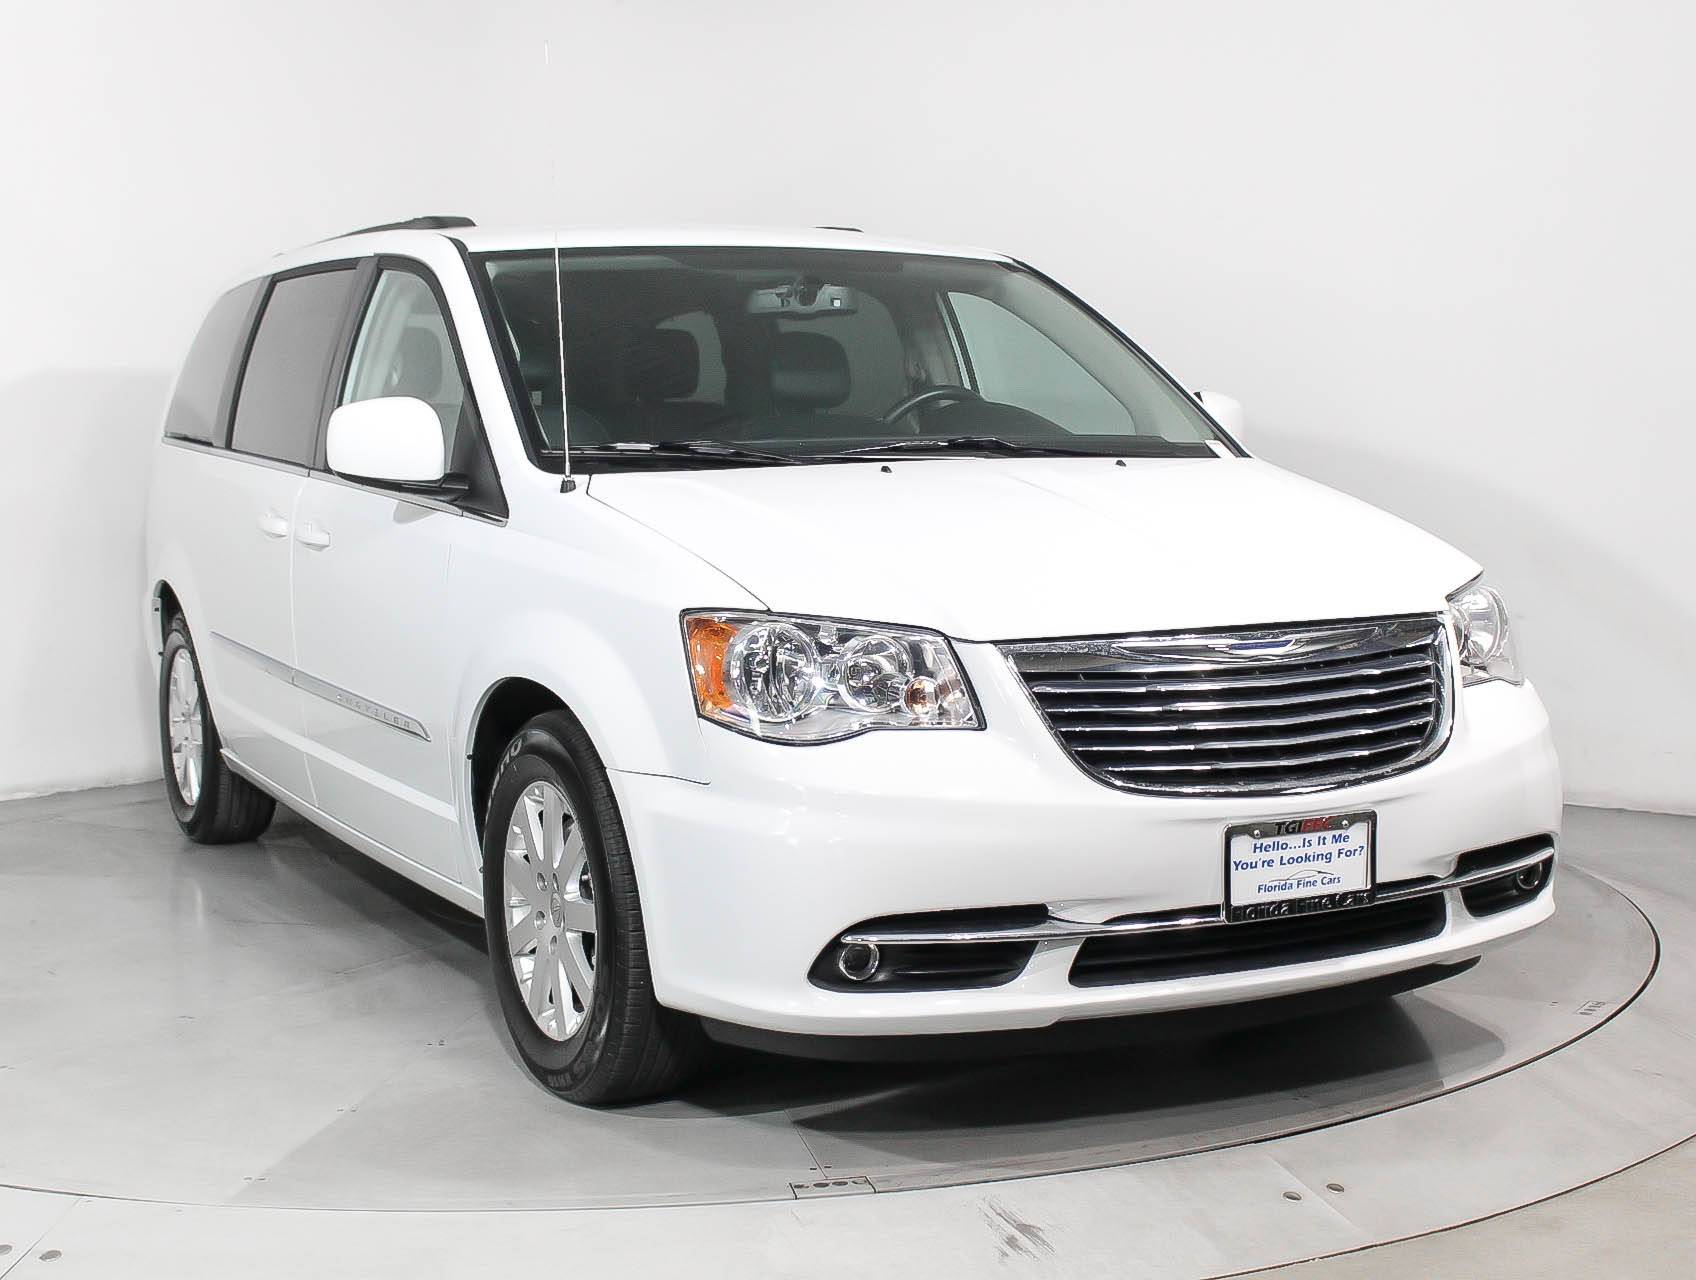 Florida Fine Cars - Used CHRYSLER TOWN & COUNTRY 2015 MIAMI TOURING